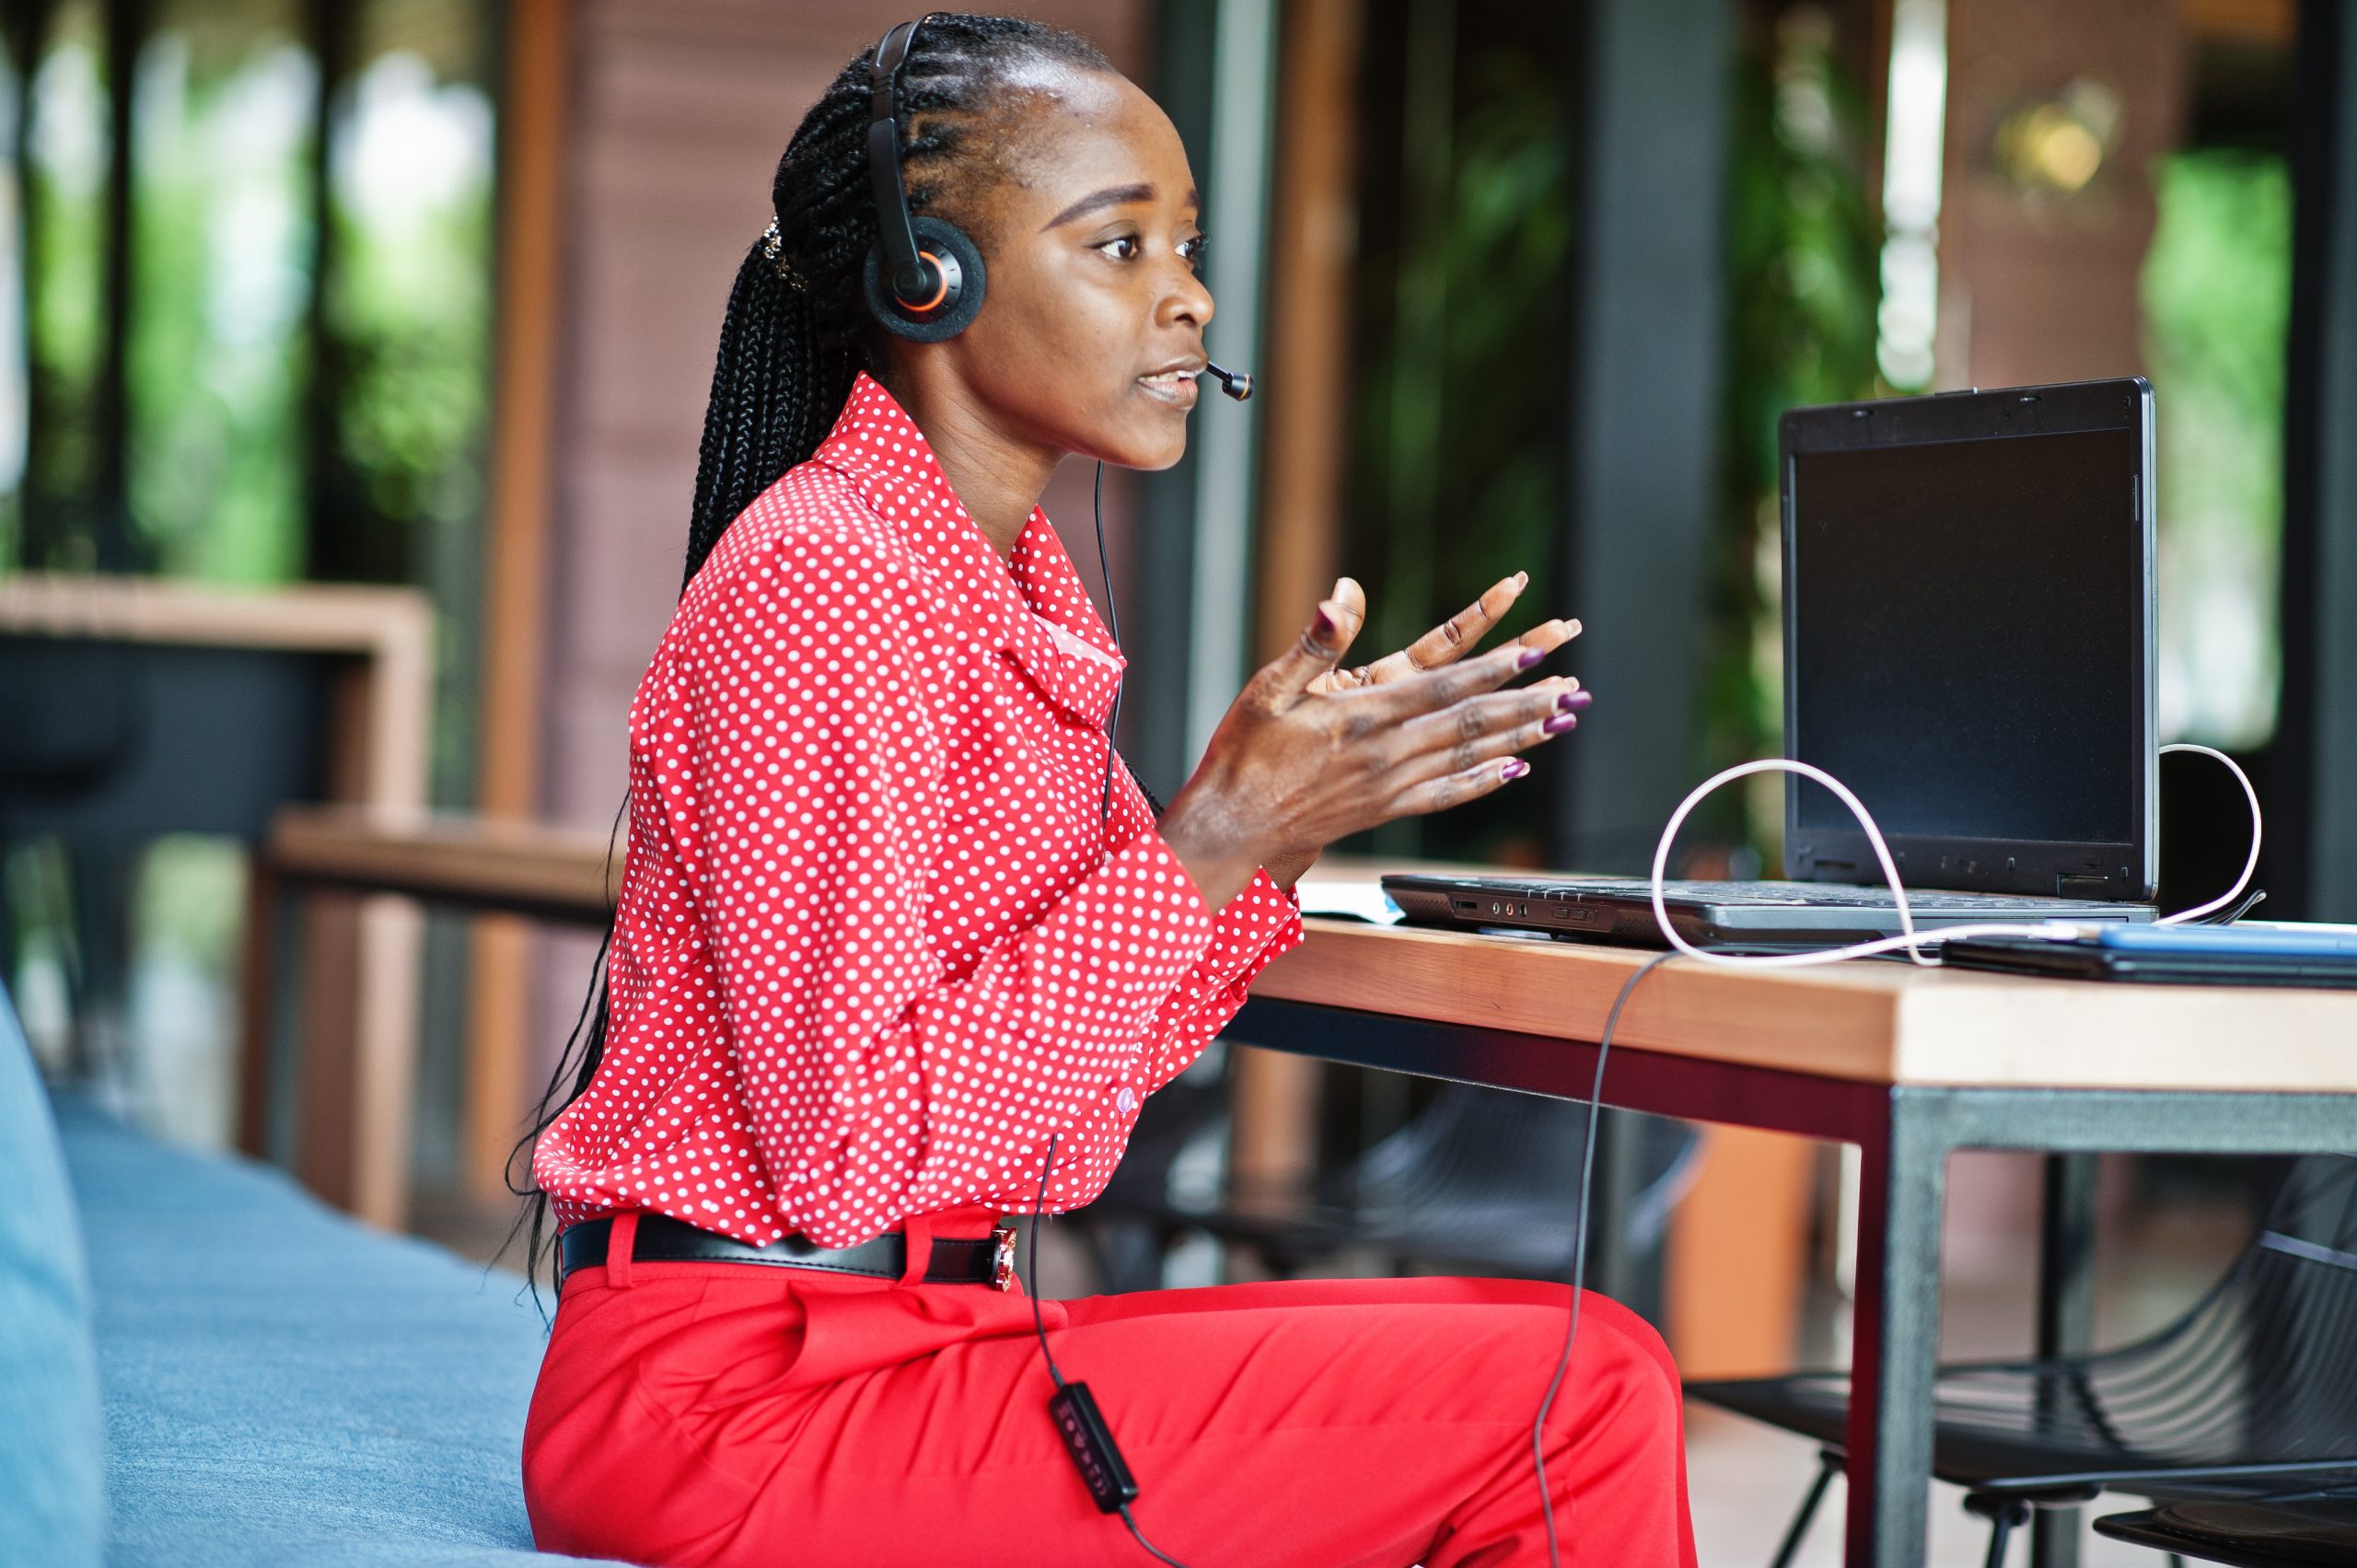 A woman in a checkered red shirt seated with headphones and a laptop.